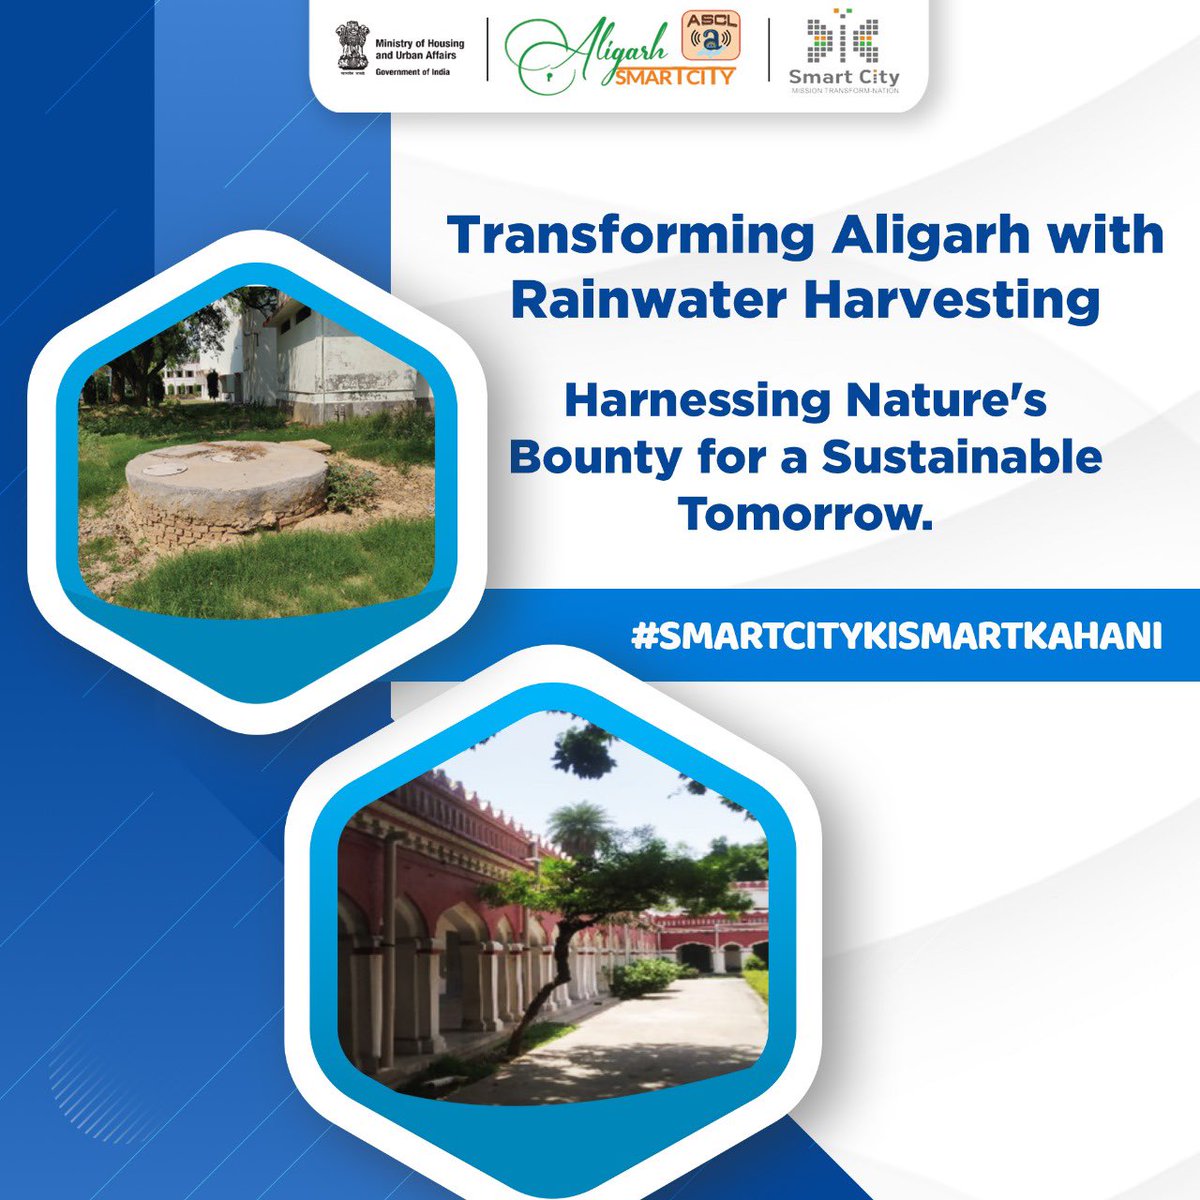 The Rain Water Harvesting and Ground Water Recharge project in #Aligarh, executed by #AligarhSmartCity, has been highly impactful in addressing water-related challenges, ensuring sustainable water management, and promoting the overall well-being of the community.